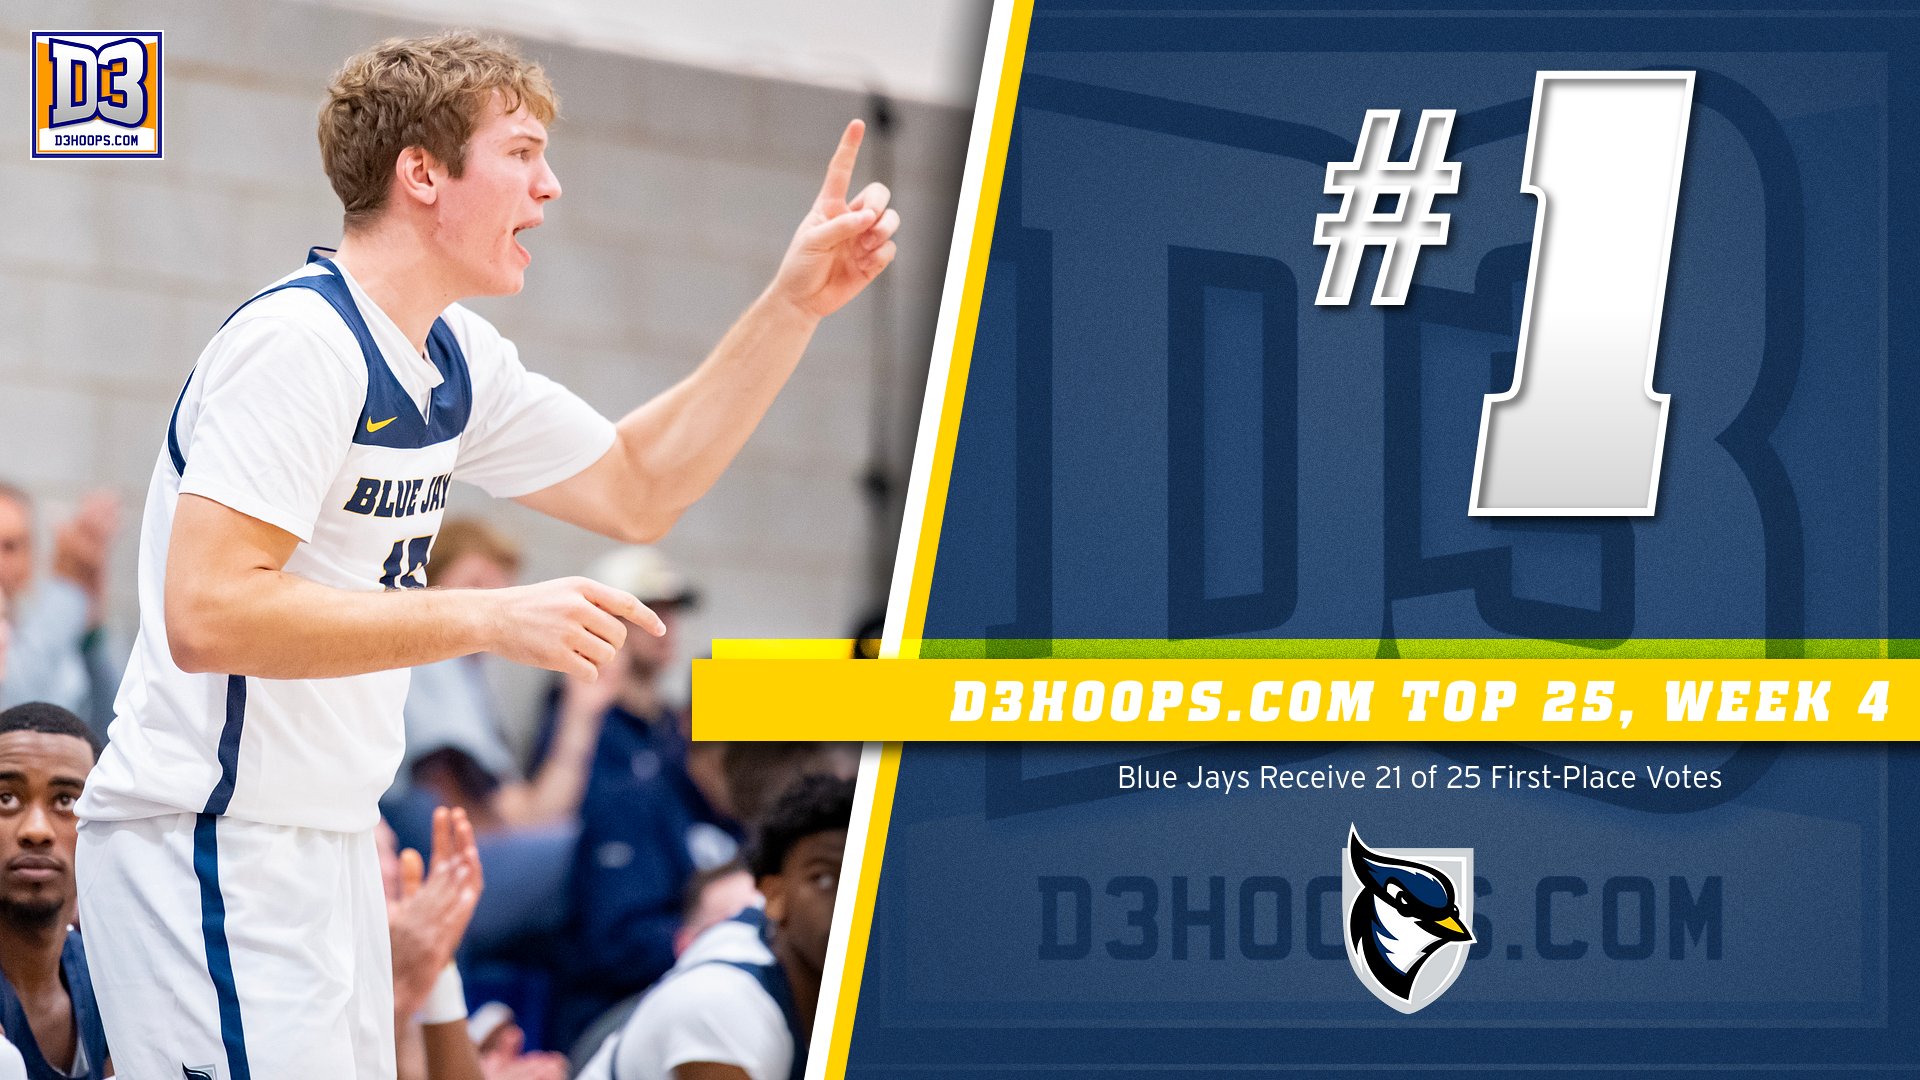 Men's Basketball Claims No. 1 Spot in D3hoops National Rankings